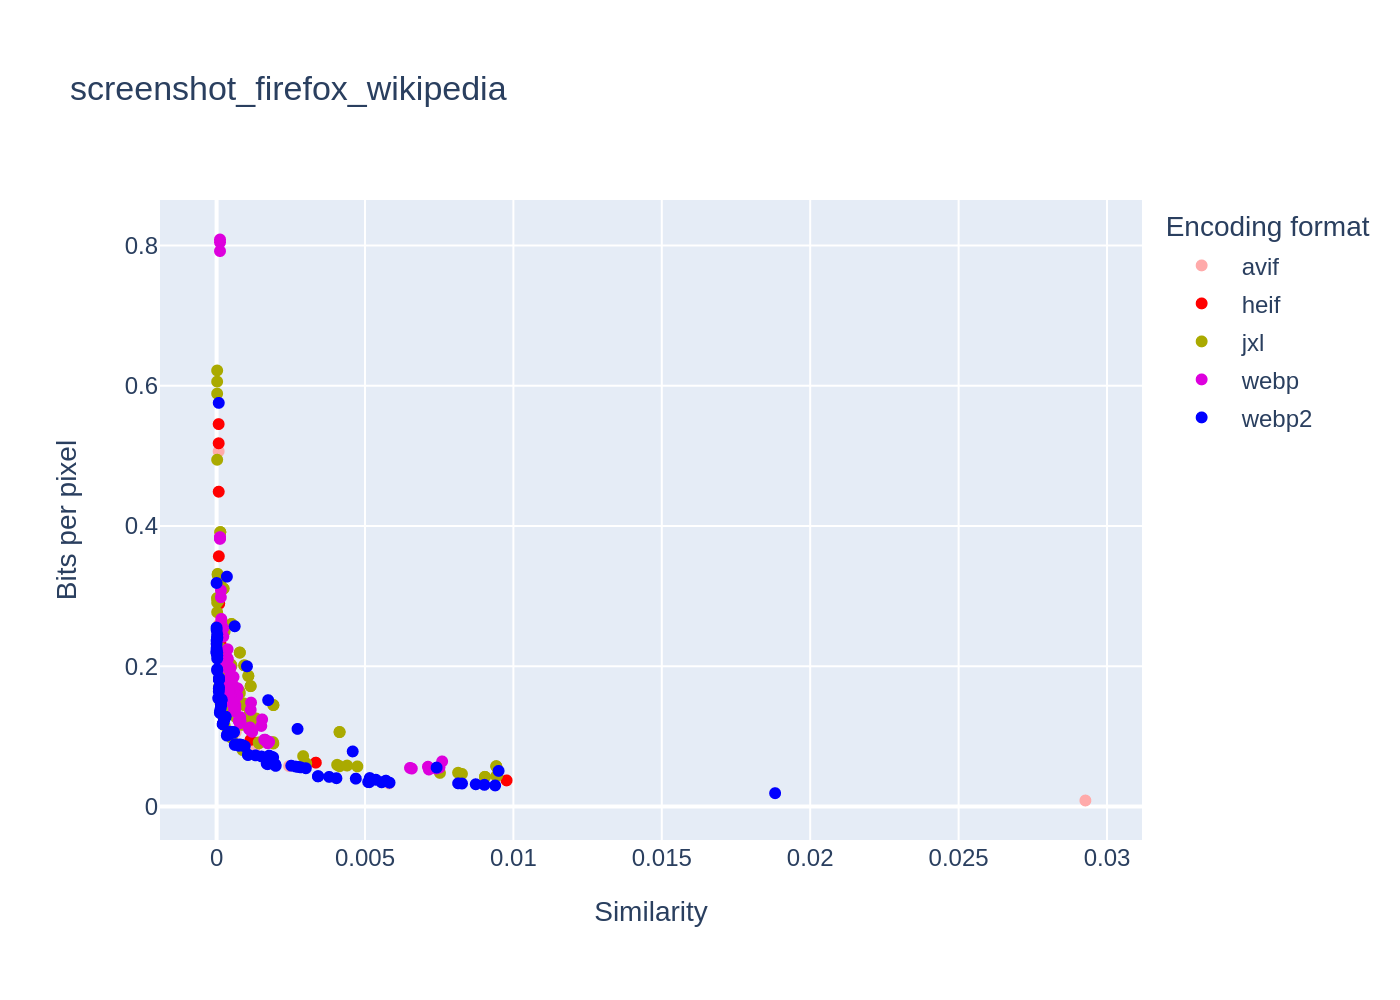 Graph of quality as a function of size for different formats for a Wikipedia screenshot.